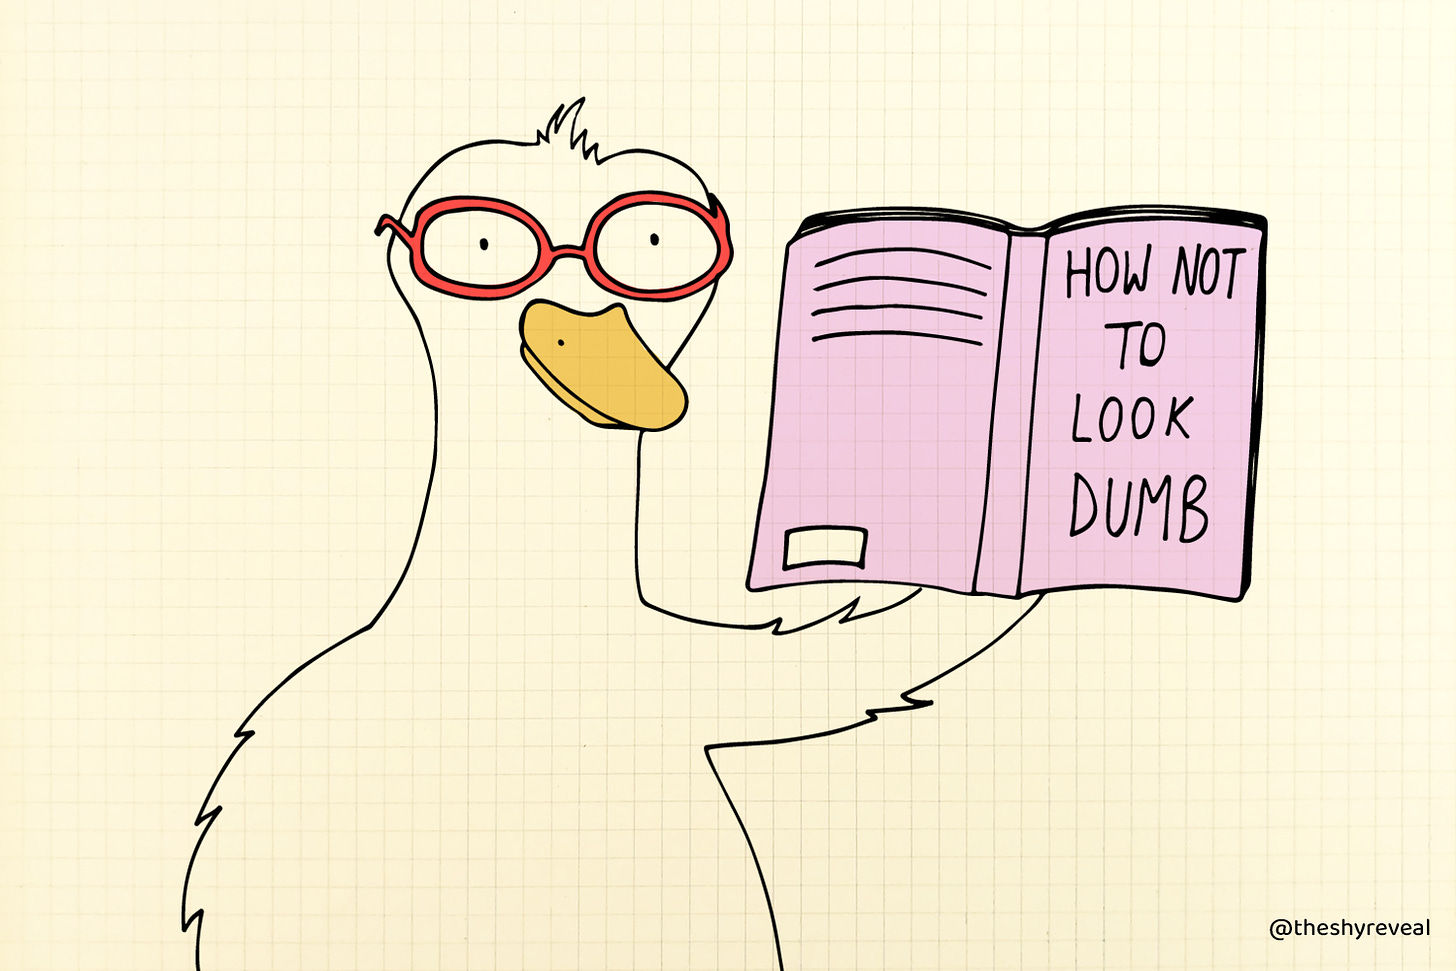 A goose with glasses reading a book called "How not to look dumb".